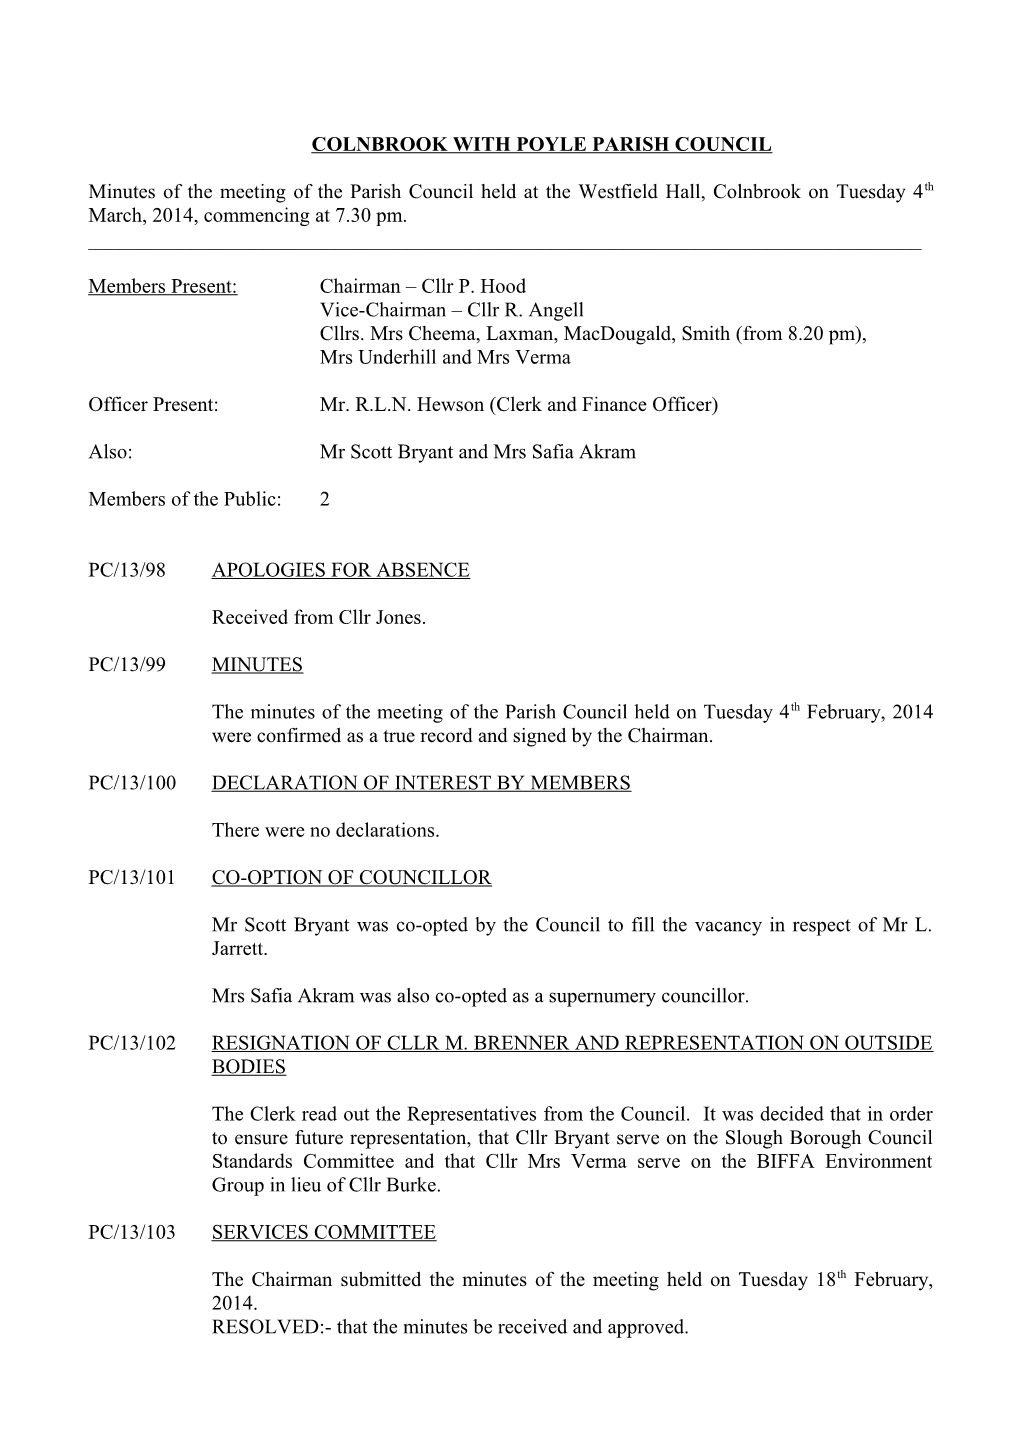 PC Meeting Minutes 4 March 2014